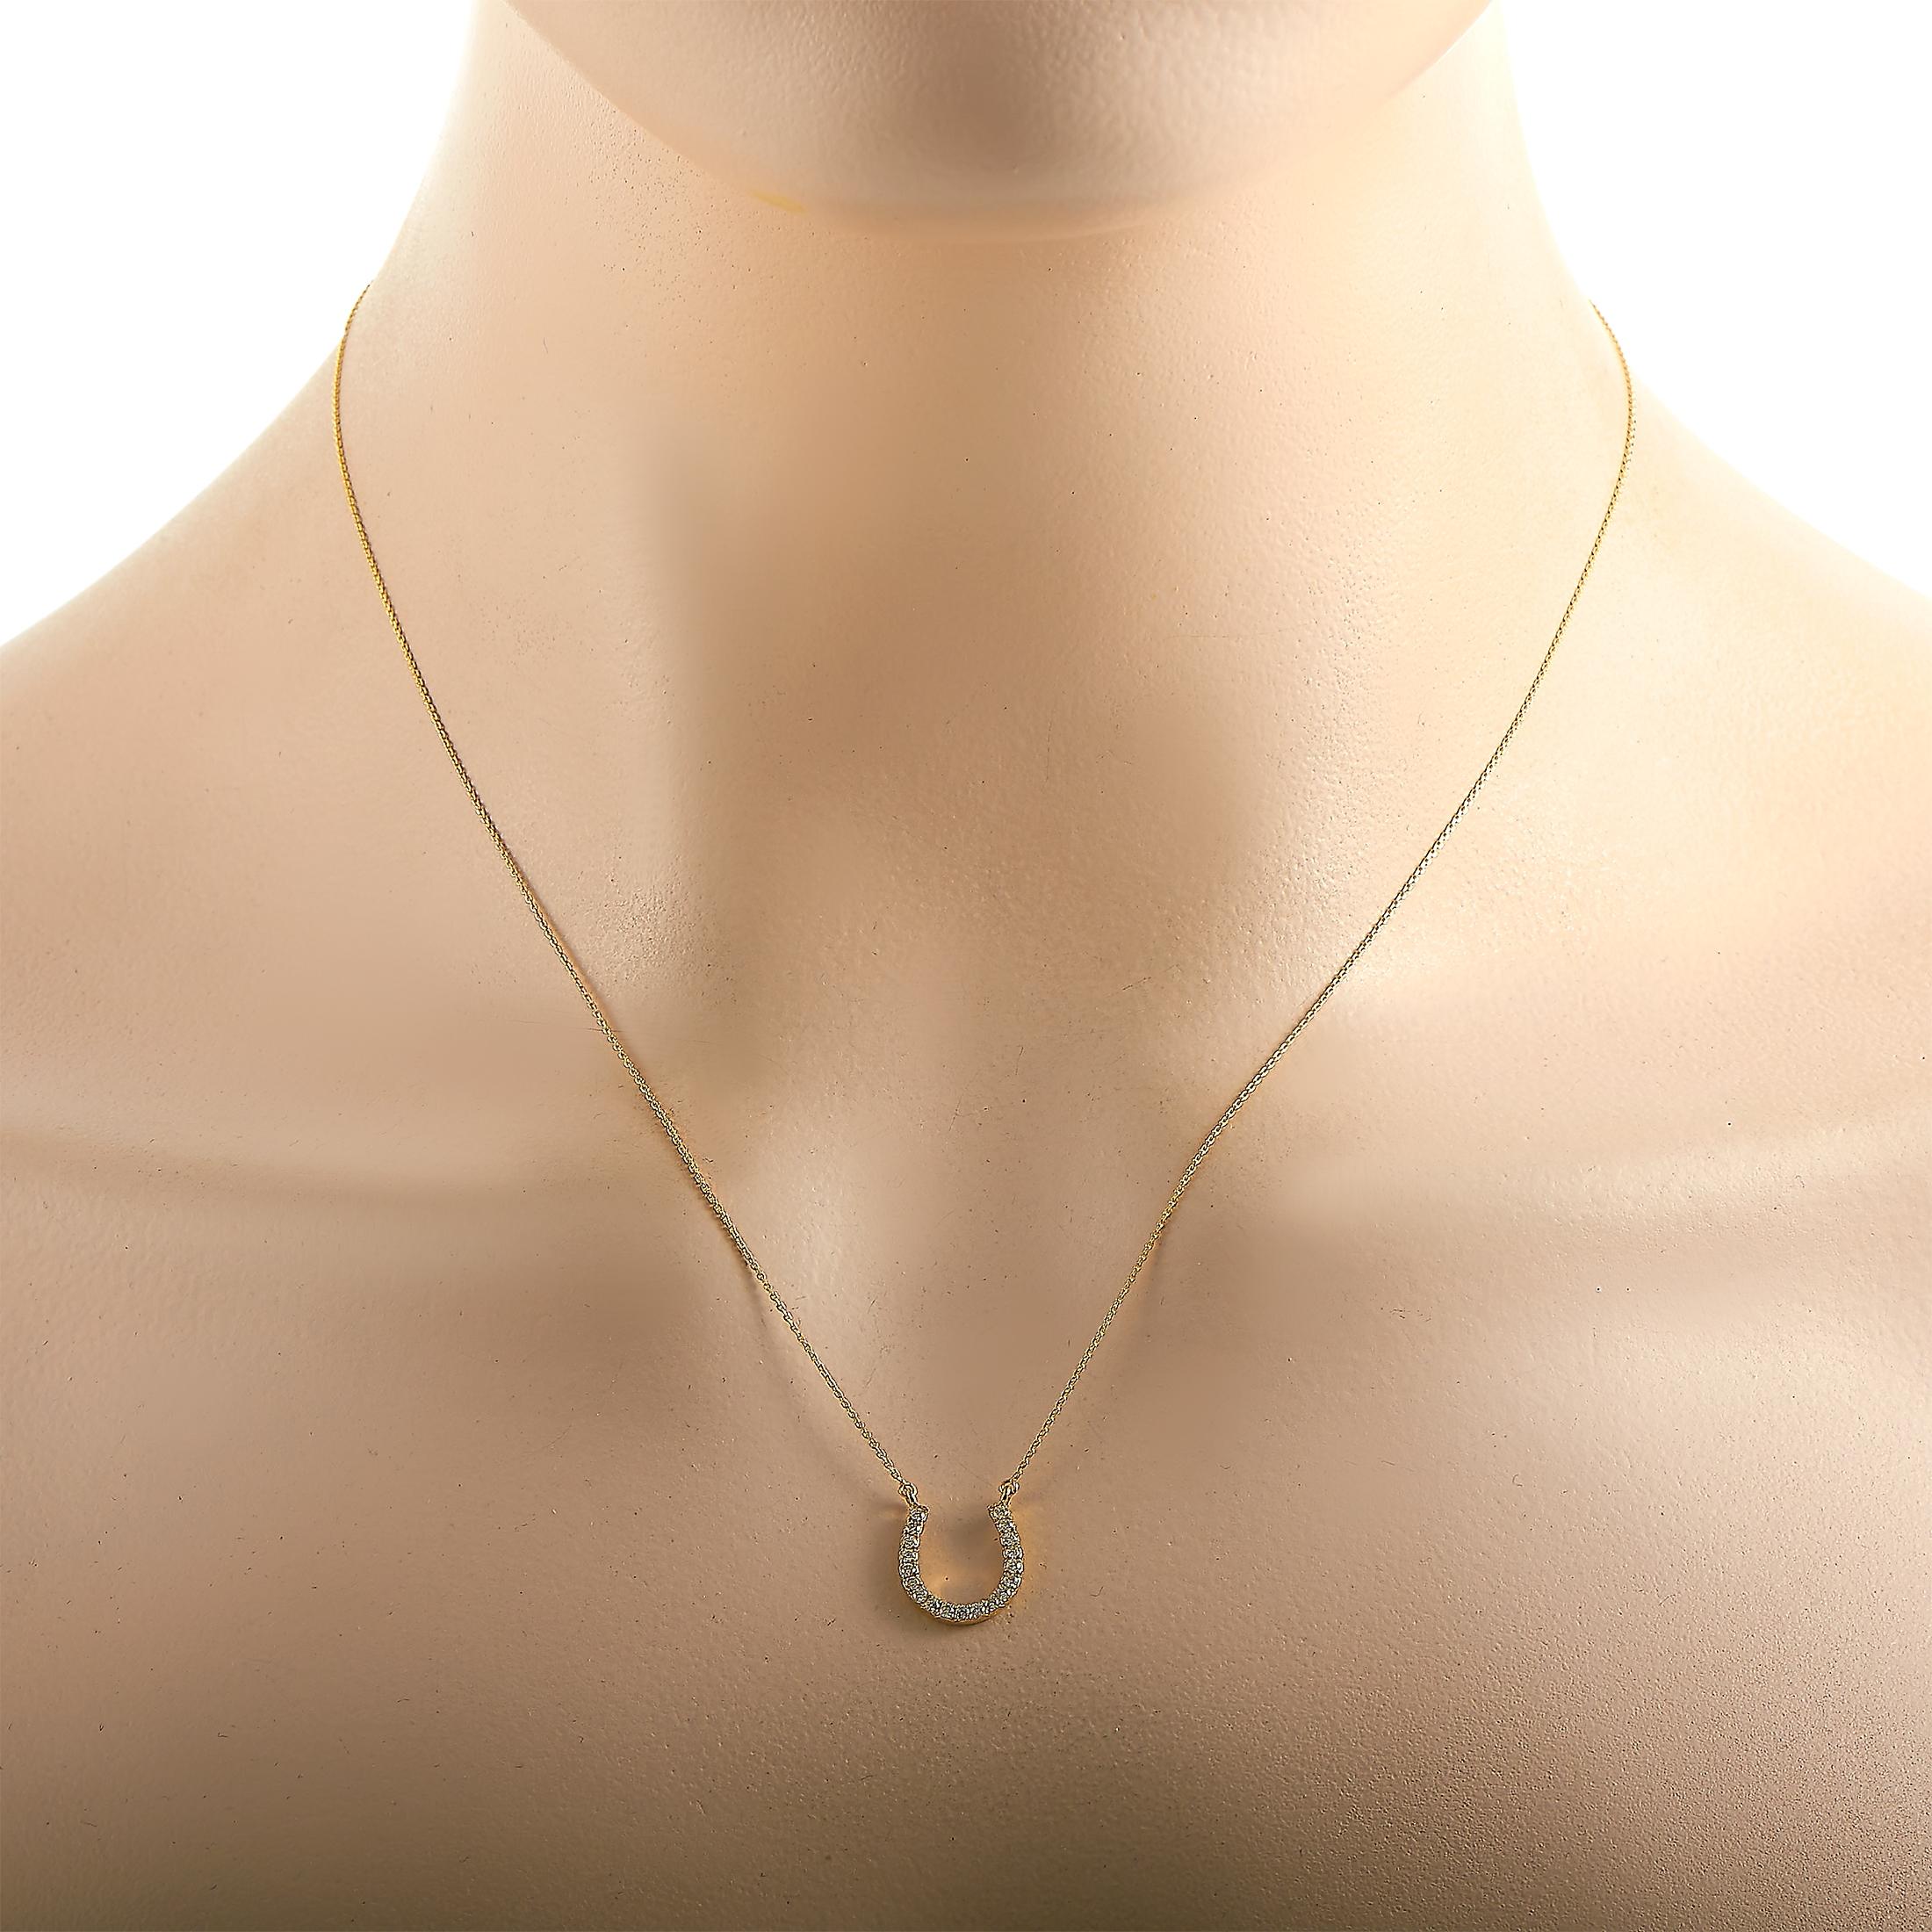 This LB Exclusive necklace is made of 14K yellow gold and embellished with diamonds that amount to 0.20 carats. The necklace weighs 2.1 grams and is presented with an 18” chain and a horseshoe pendant that measures 0.50” in length and 0.50” in